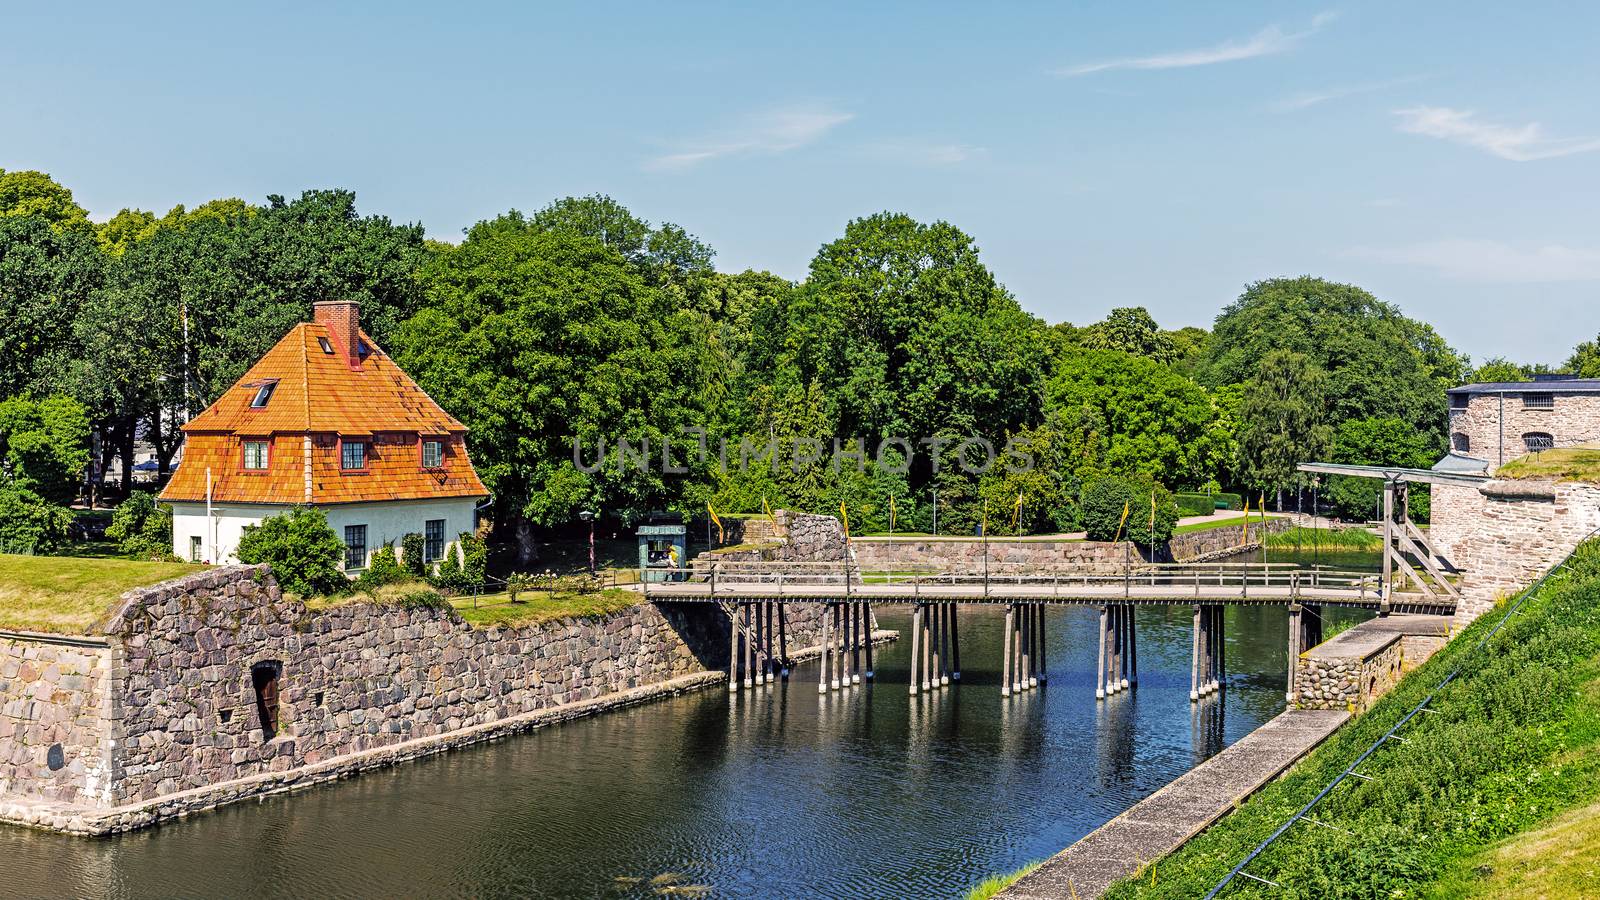 View on the moat and bascule bridge of the Kalmar Castle. The castle dates back 800 years, reached current design during the 16th century, when rebuilt by Vasa kings.